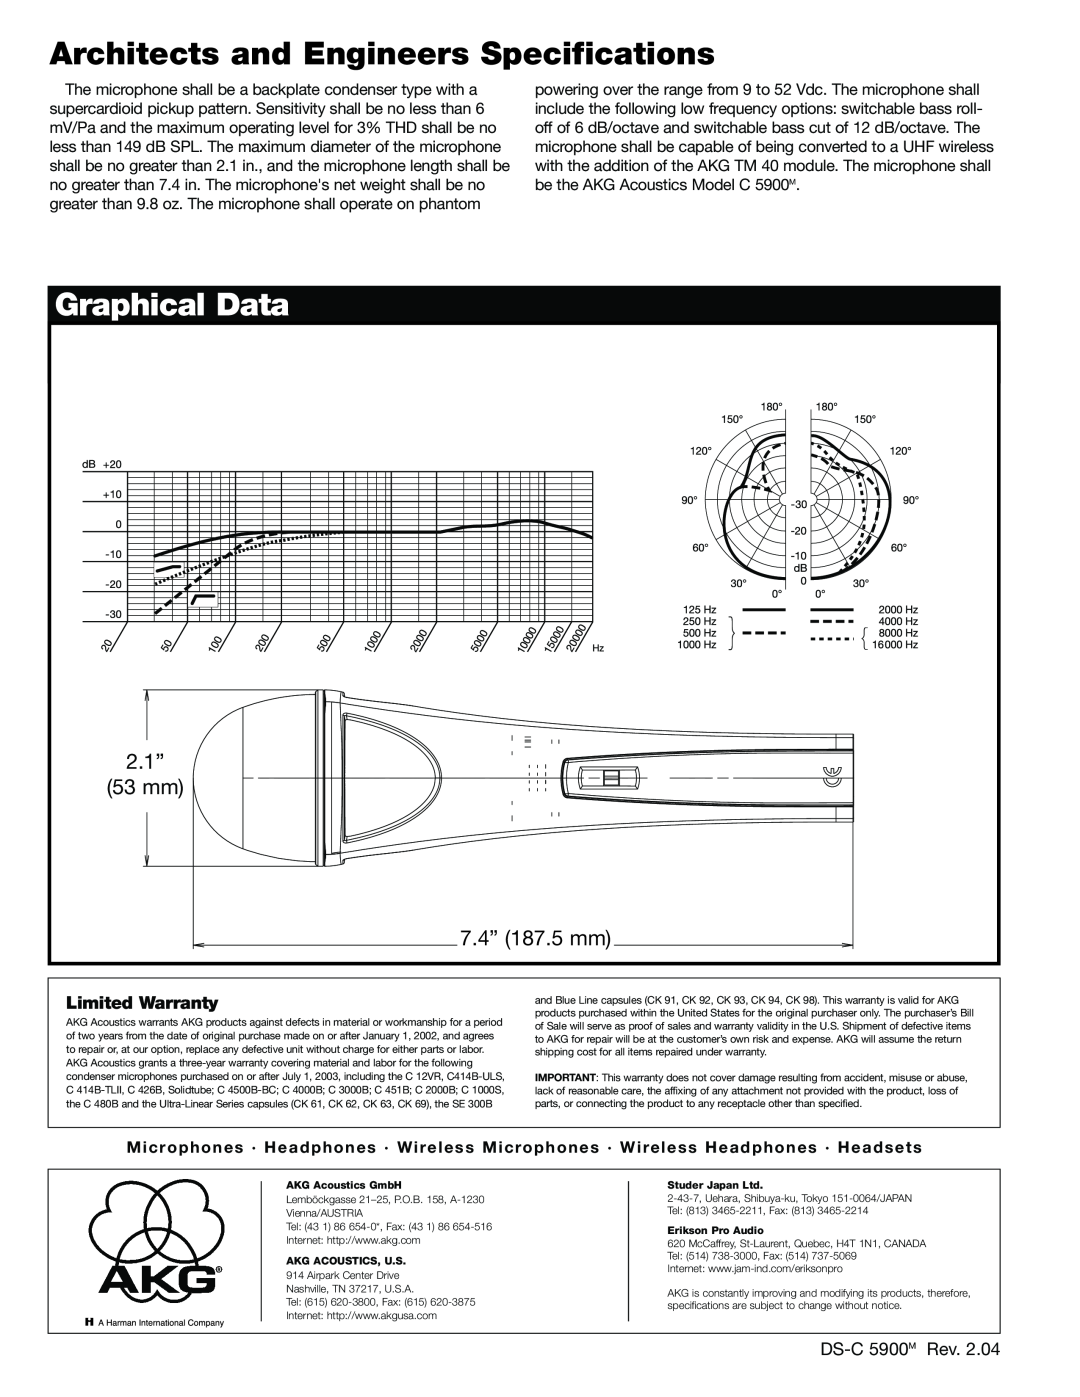 AKG Acoustics C 5900M specifications Architects and Engineers Specifications, Graphical Data, 2.1”, 53 mm, 7.4” 187.5 mm 